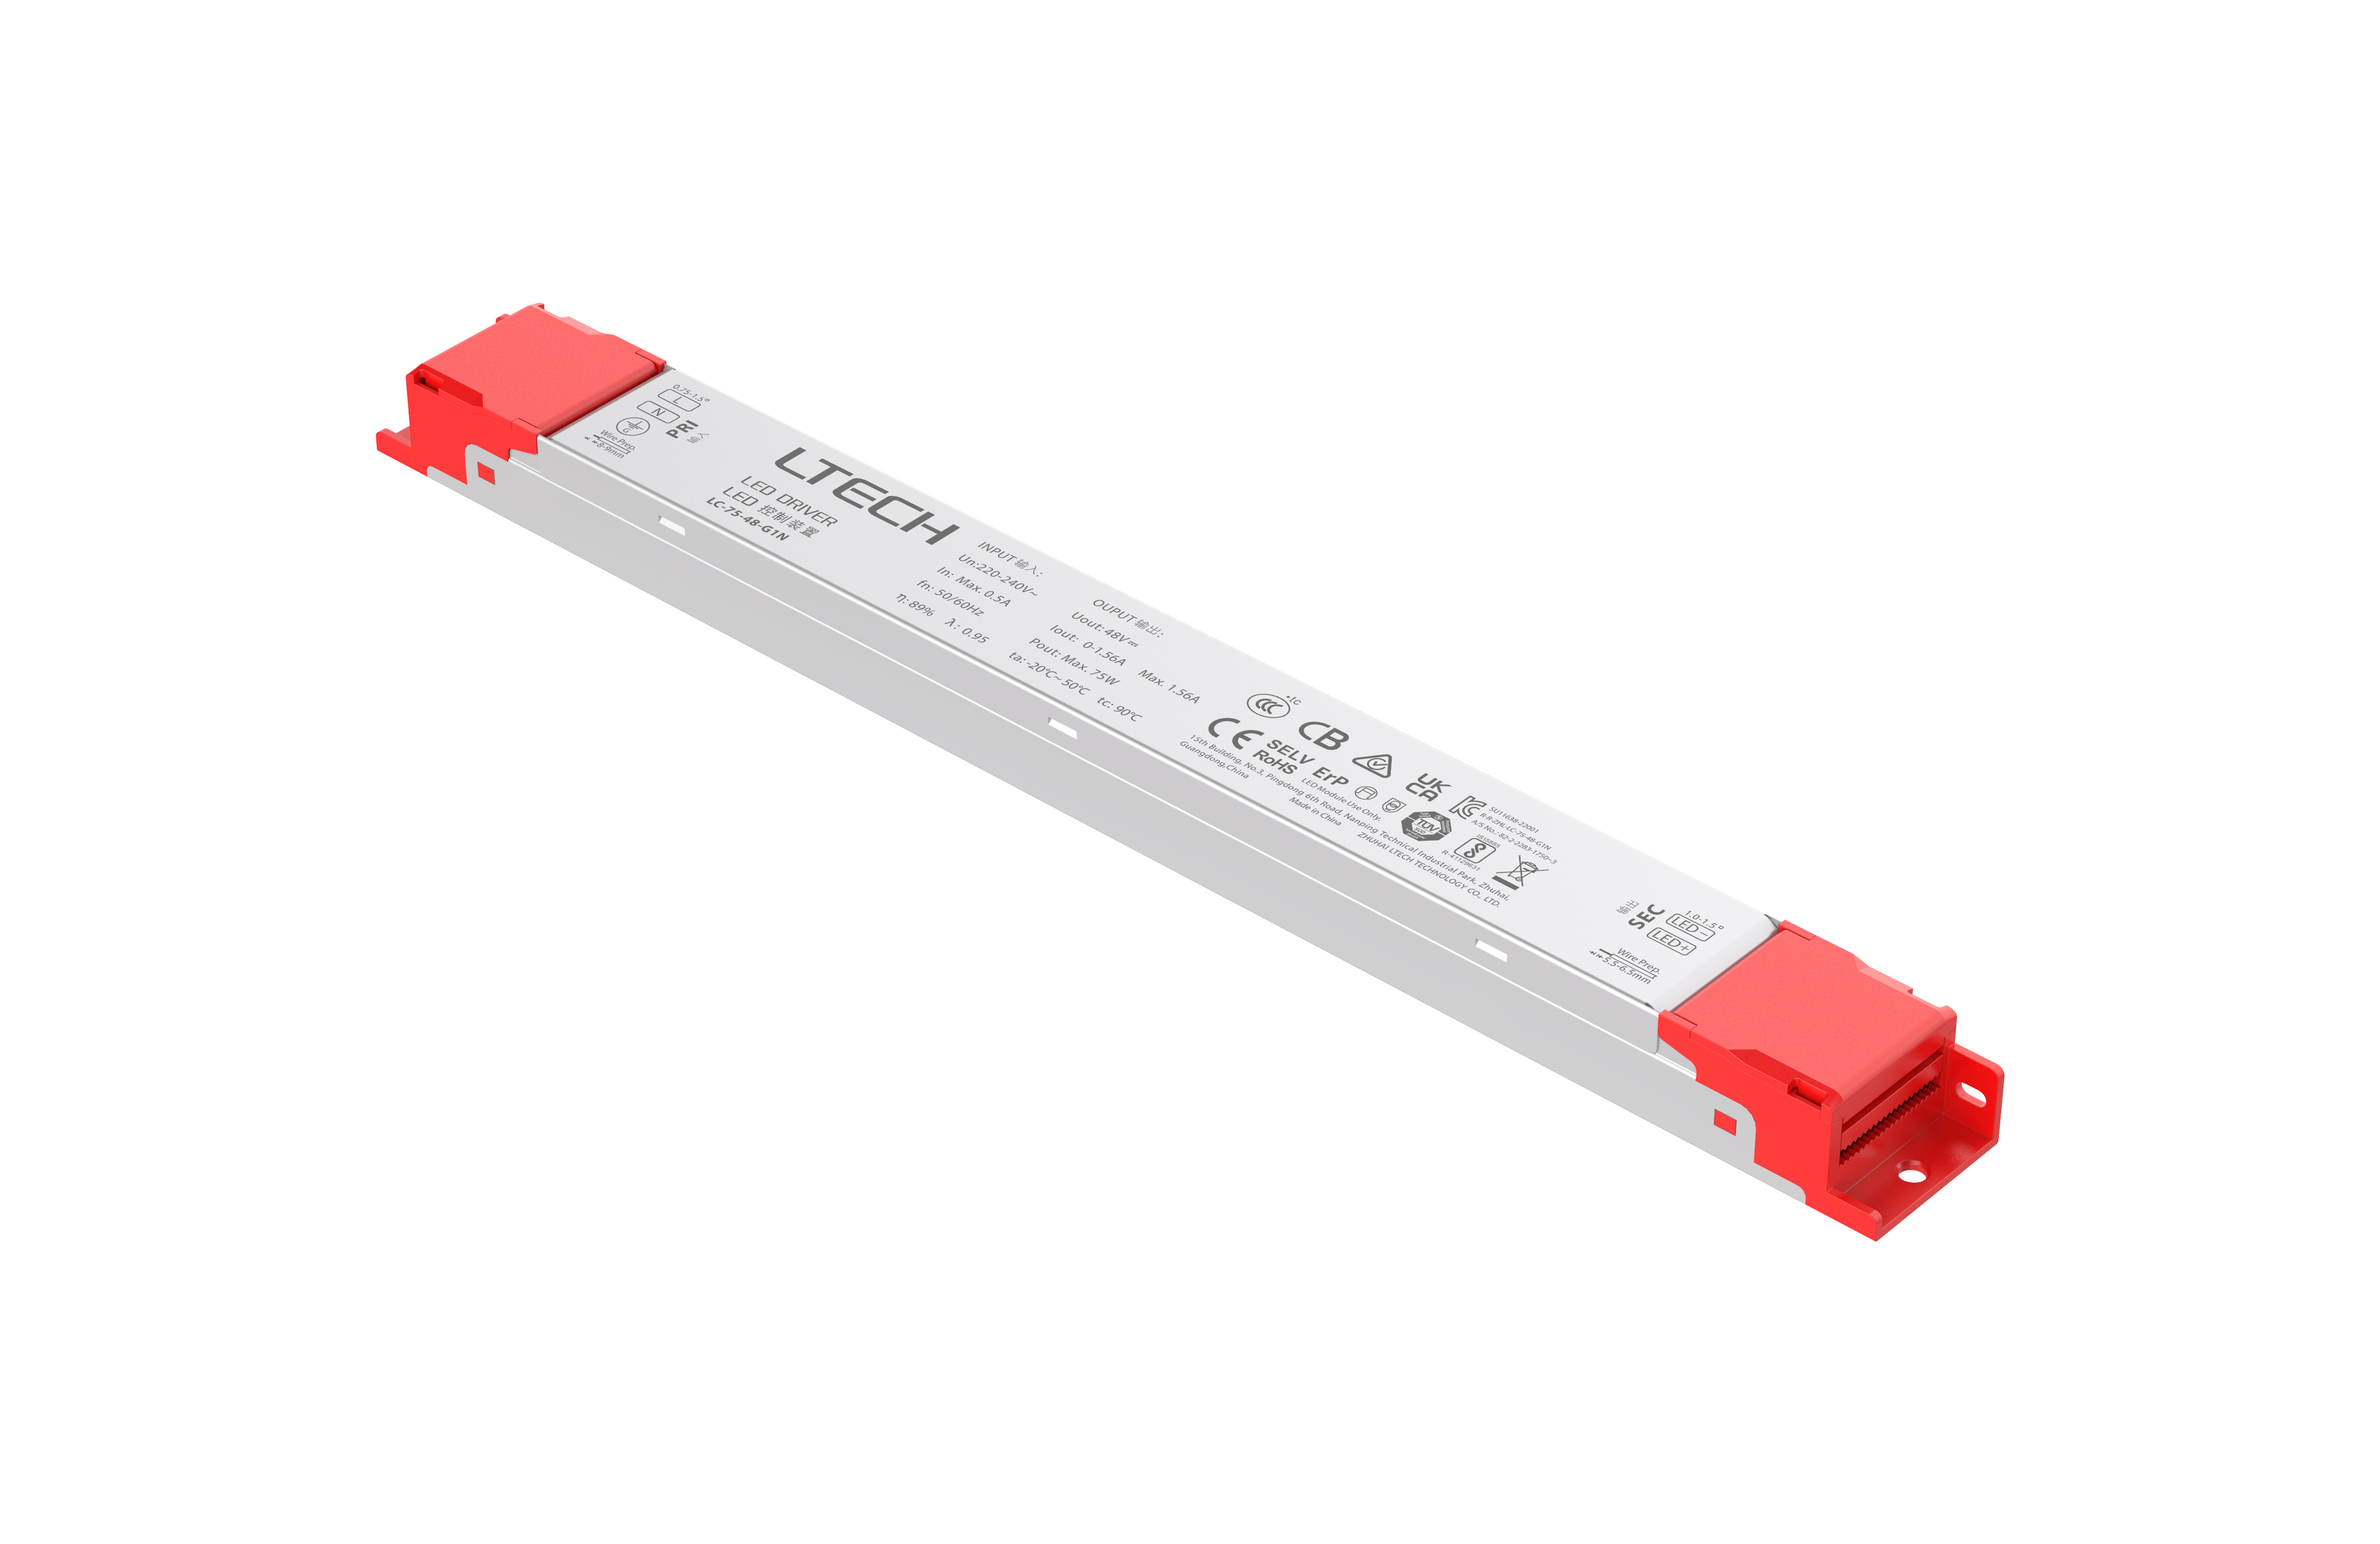 LC-75-48-G1N  Intelligent Constant Voltage  LED Driver; ON/OFF; 75W; 48VDC 1.56A ; 220-240Vac; IP20; 5yrs Warrenty.